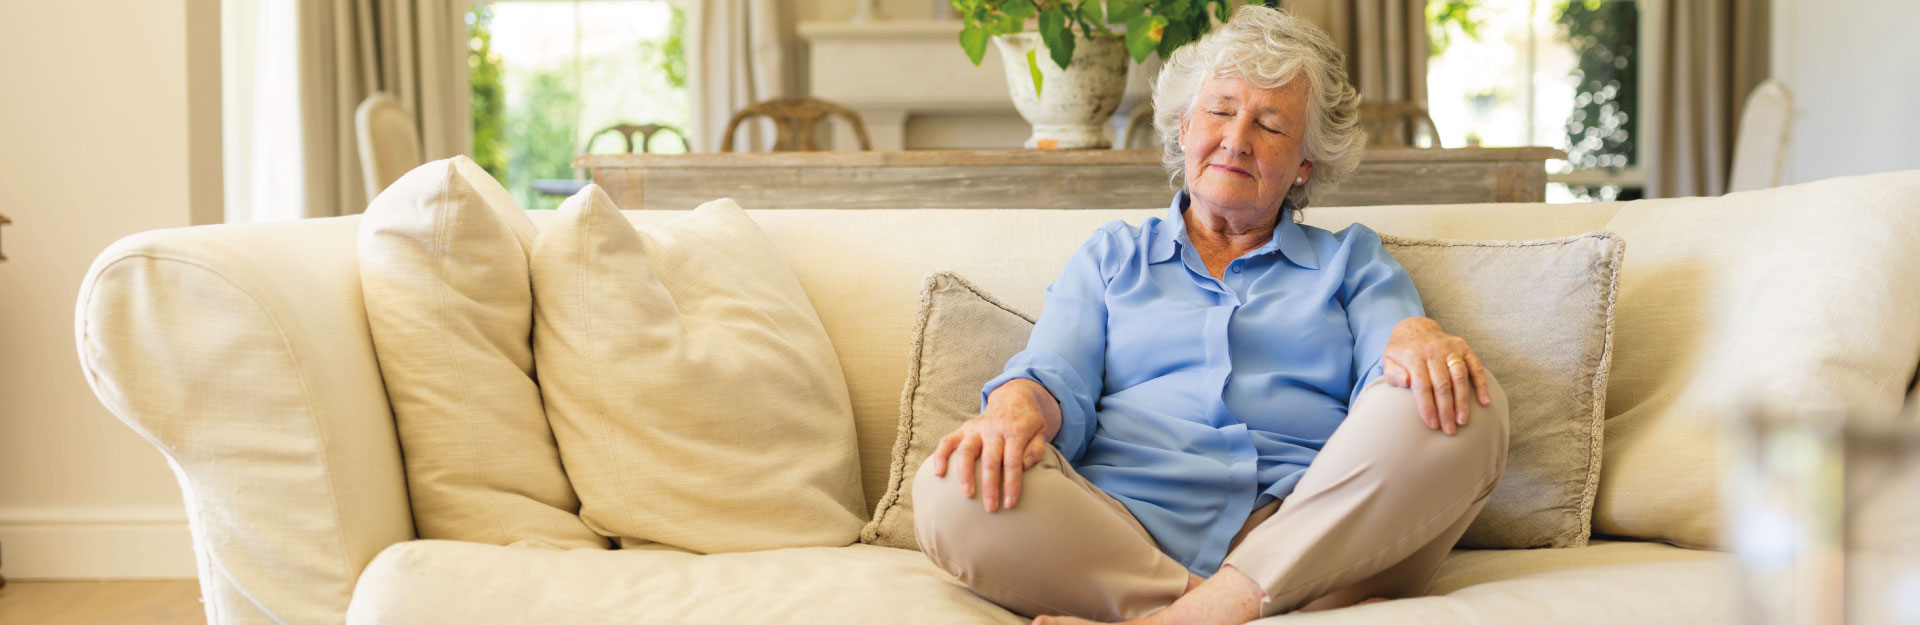 Middle-class elderly woman meditating on her sofa.